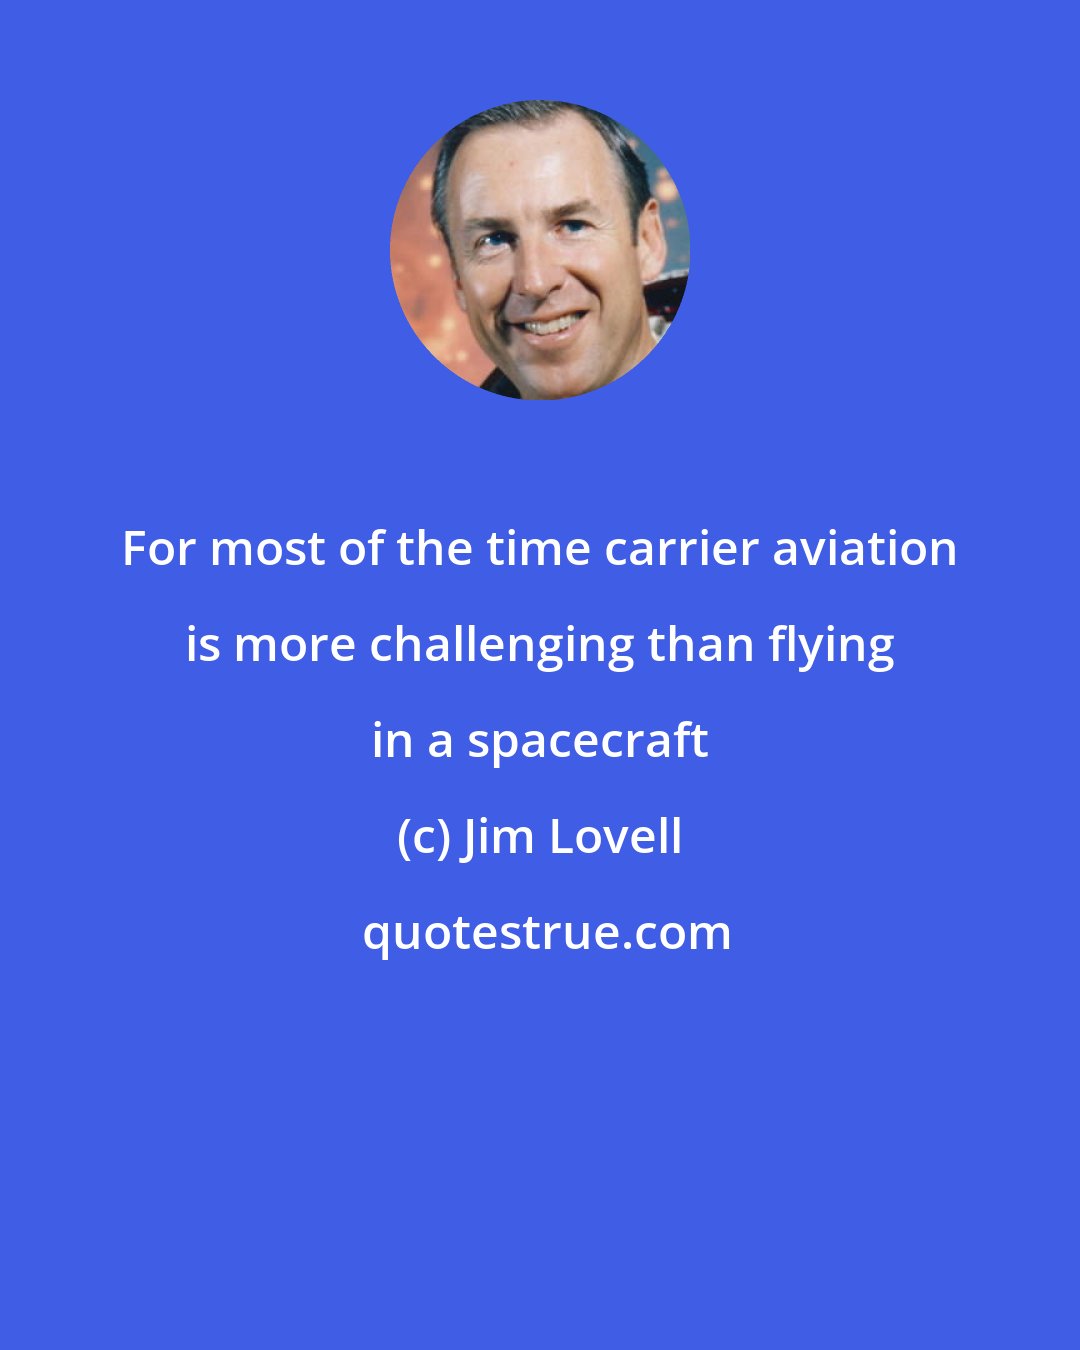 Jim Lovell: For most of the time carrier aviation is more challenging than flying in a spacecraft